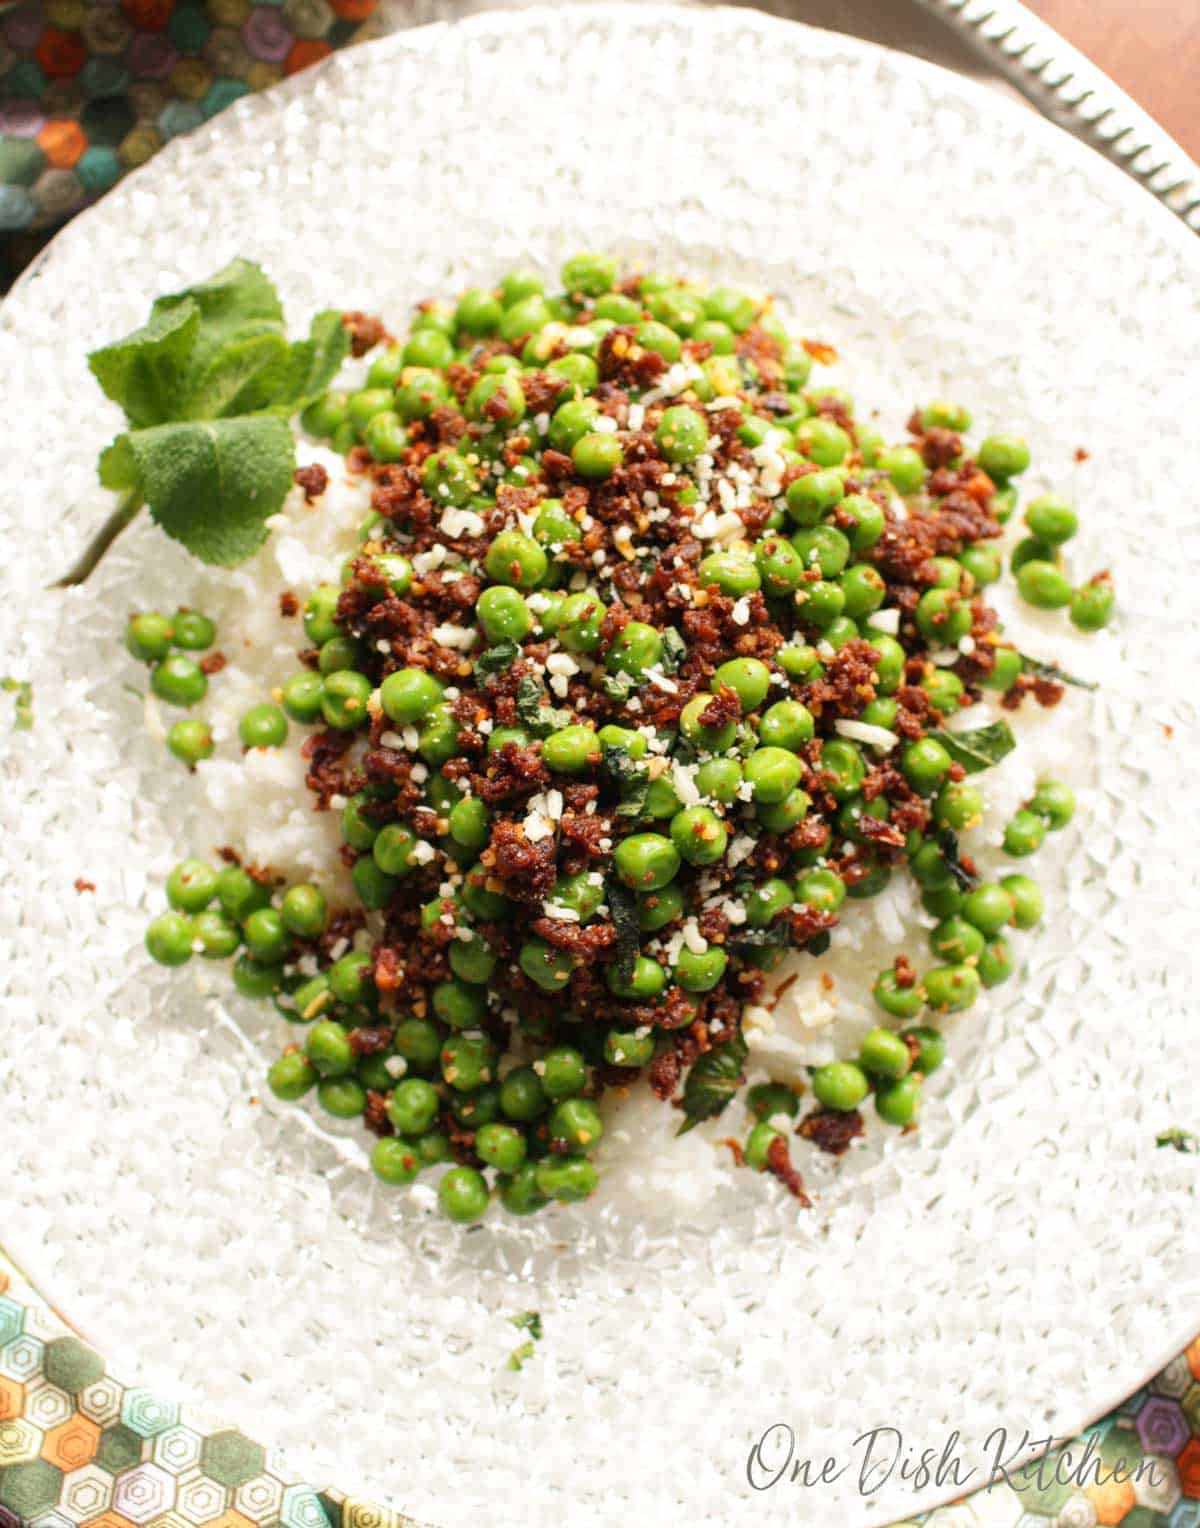 Overhead view of peas with chorizo, cotija cheese crumbles, and mint leaves over white rice on a clear glass plate  